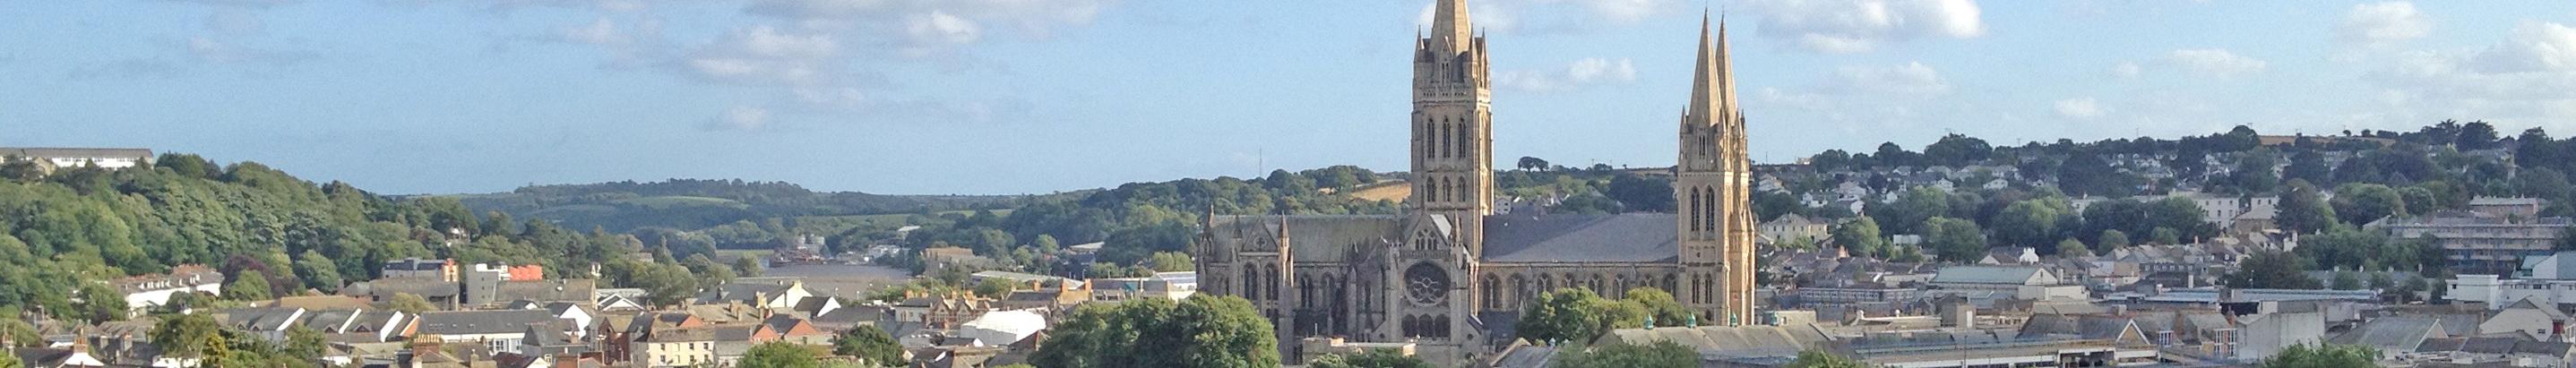 Banner image for Truro on GigsGuide